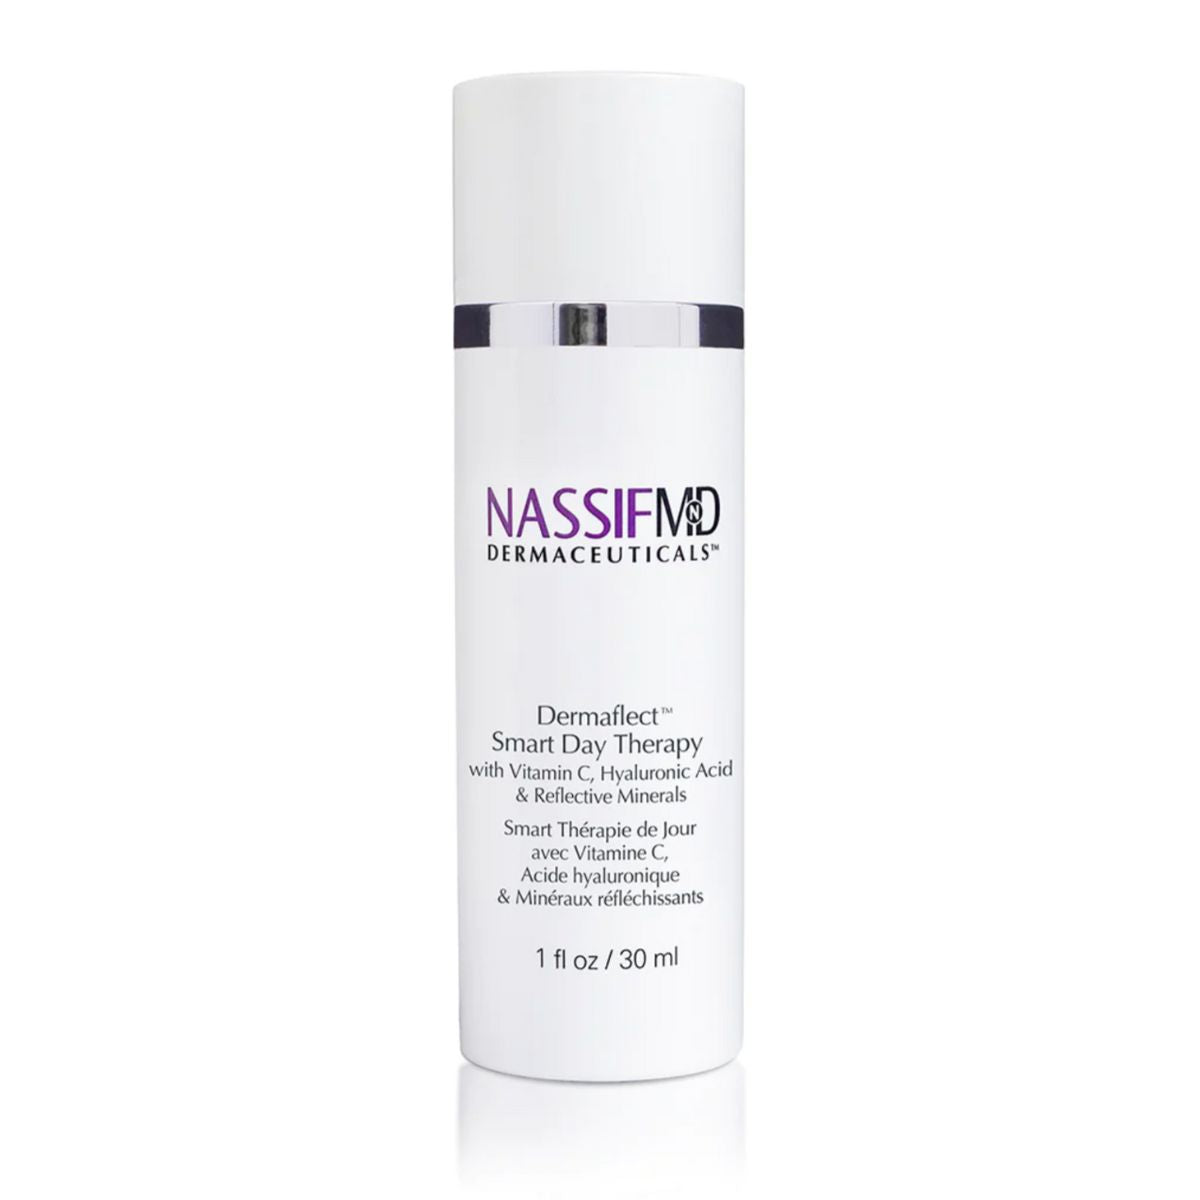 DR. NASSIF - DERMAFLECT SMART DAY Therapy, 30 ml